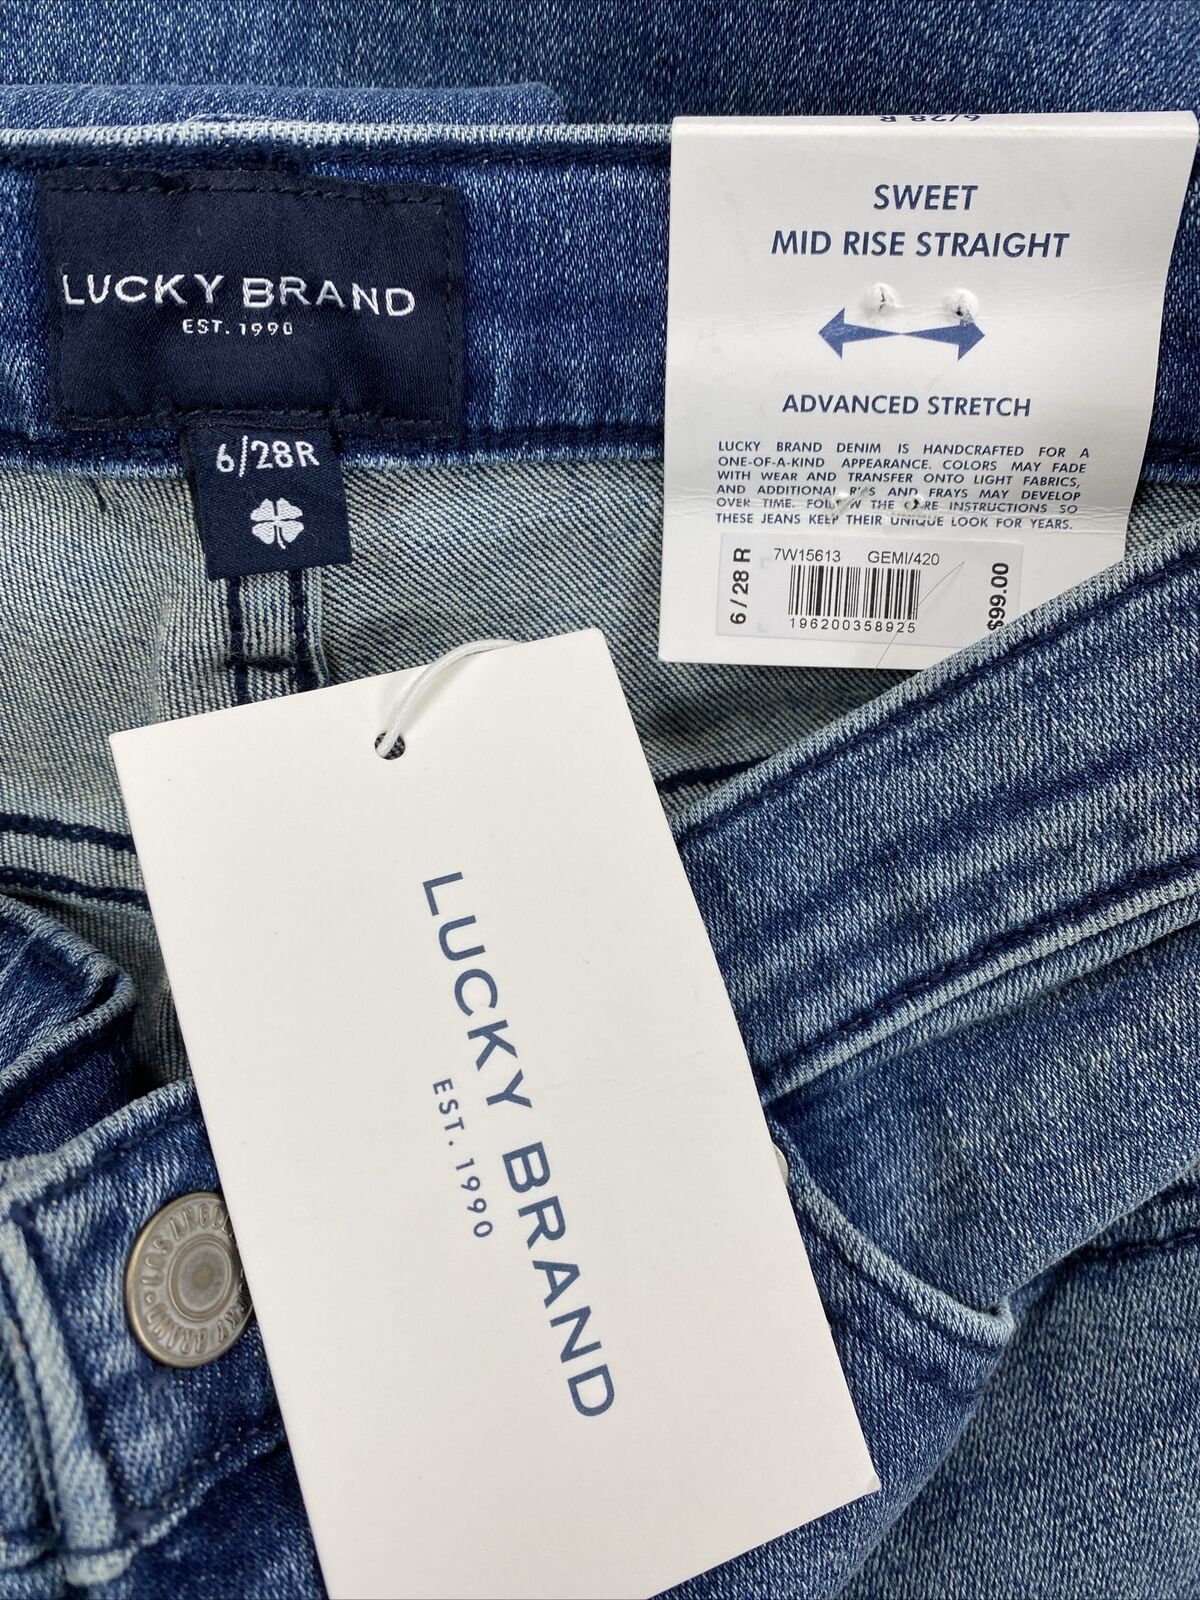 NEW Lucky Brand Women's Medium Wash Sweet Mid Rise Straight Jeans - 6/28R